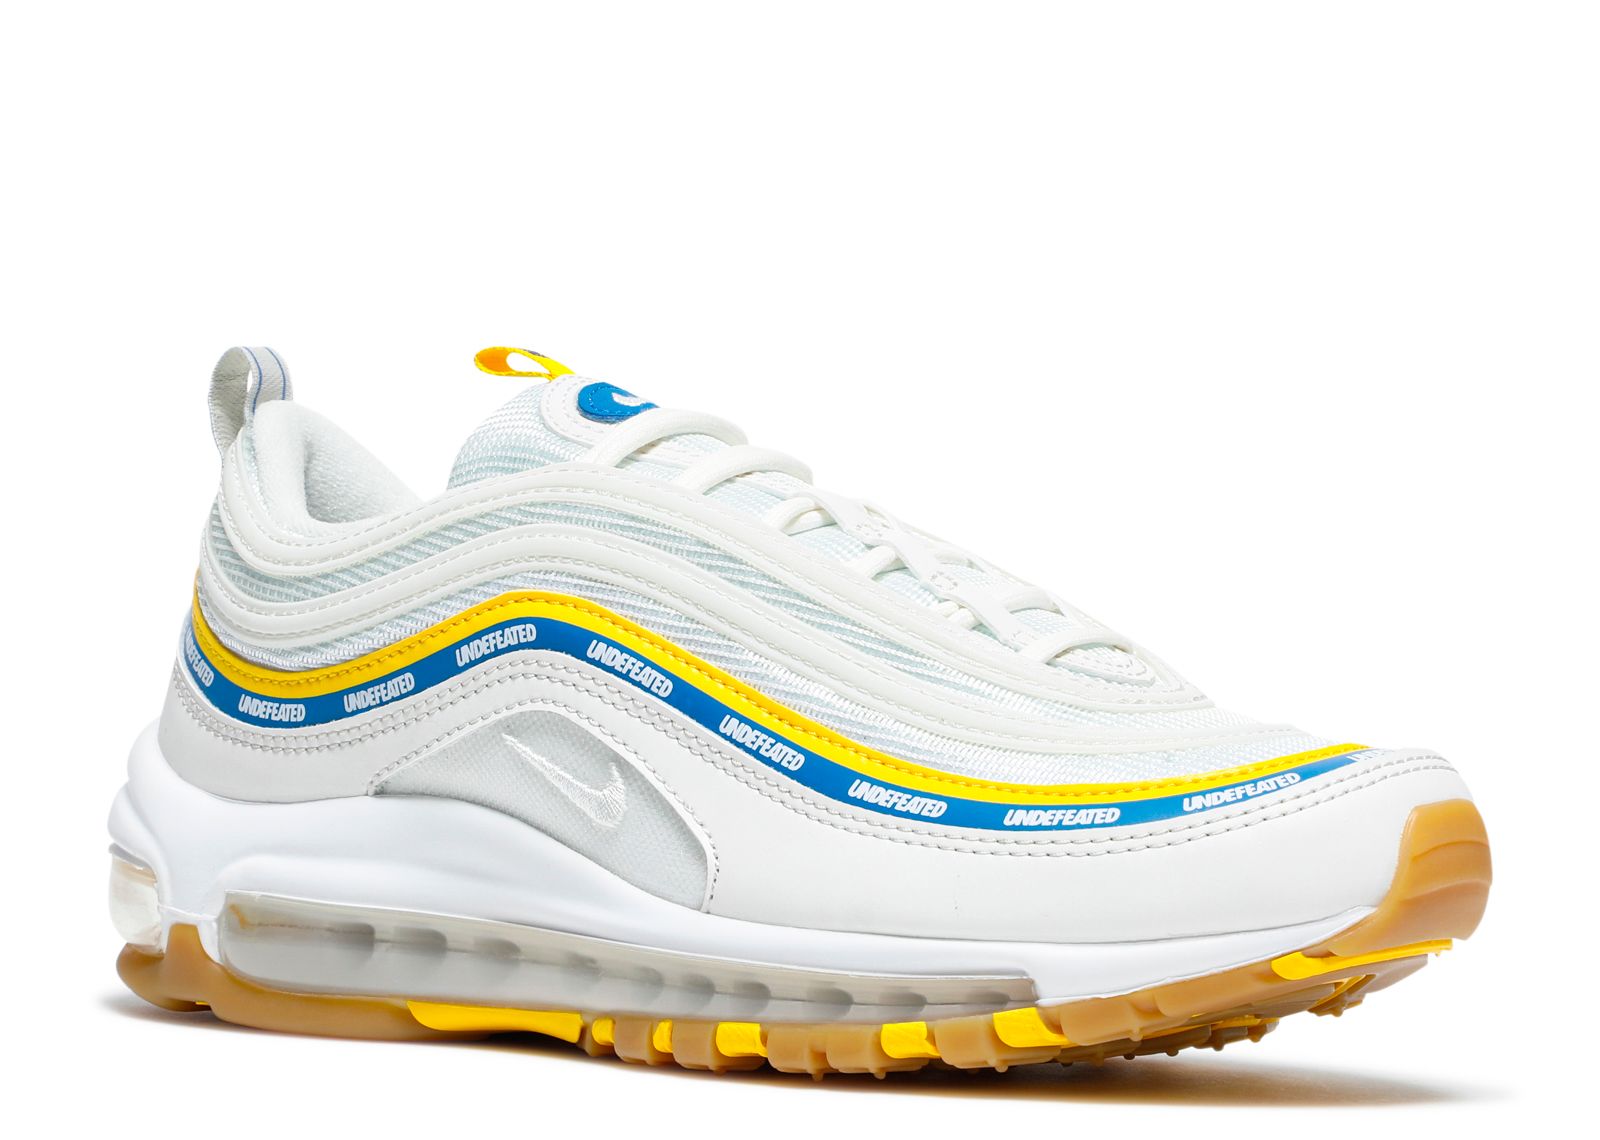 Undefeated X Air Max 97 'UCLA Bruins' - DC4830 100 - sail/aero blue/midwest gold/white | Flight